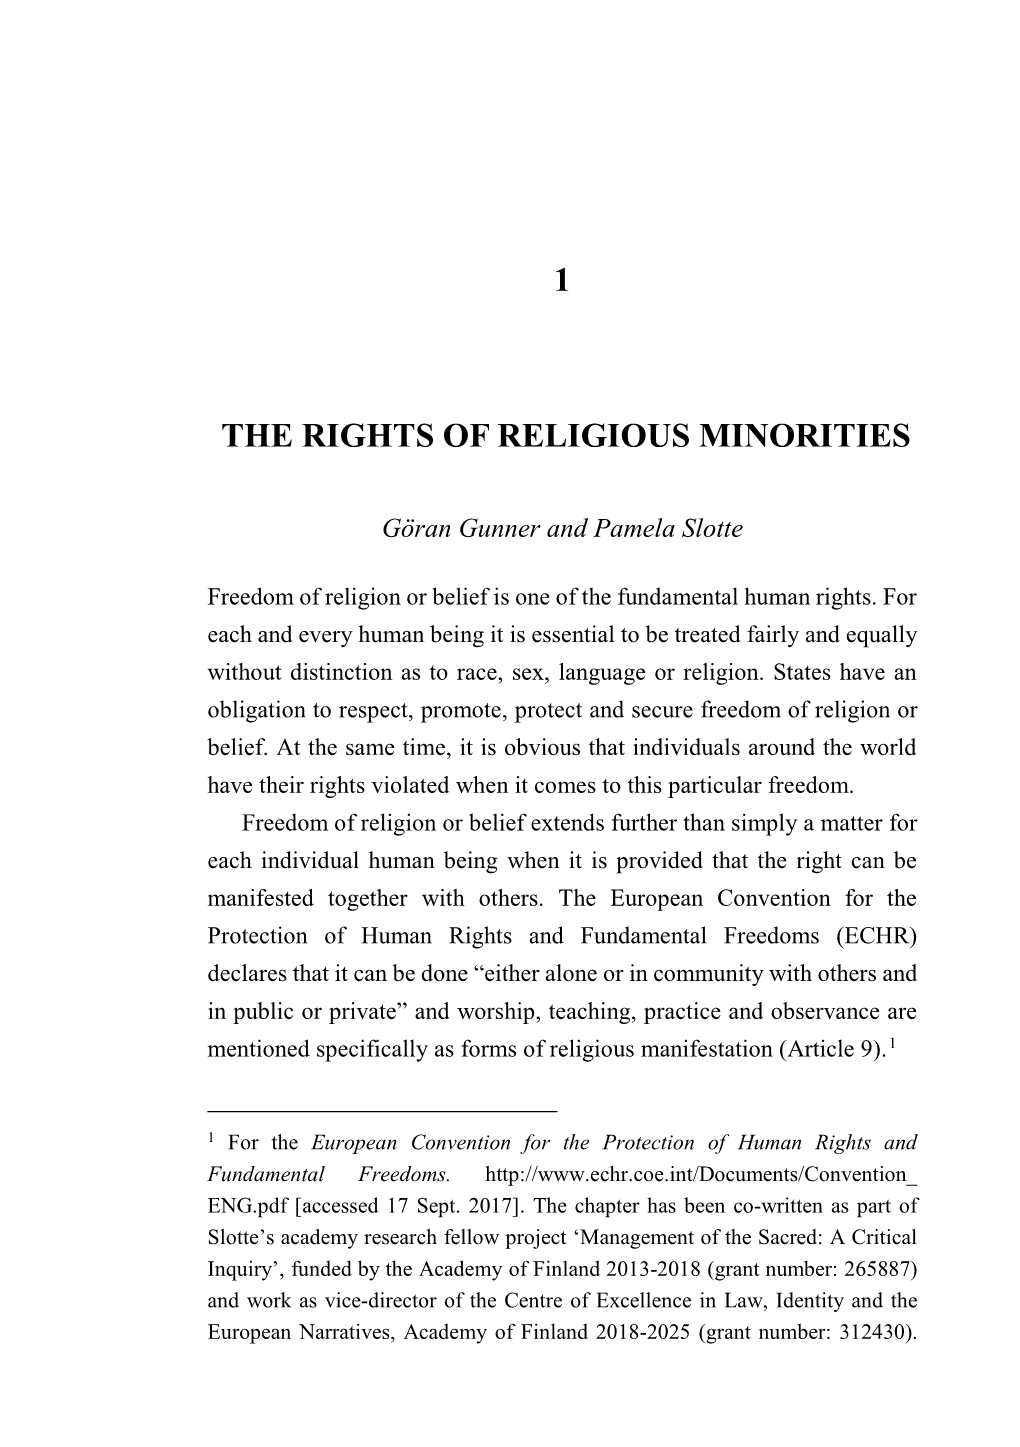 1 the Rights of Religious Minorities